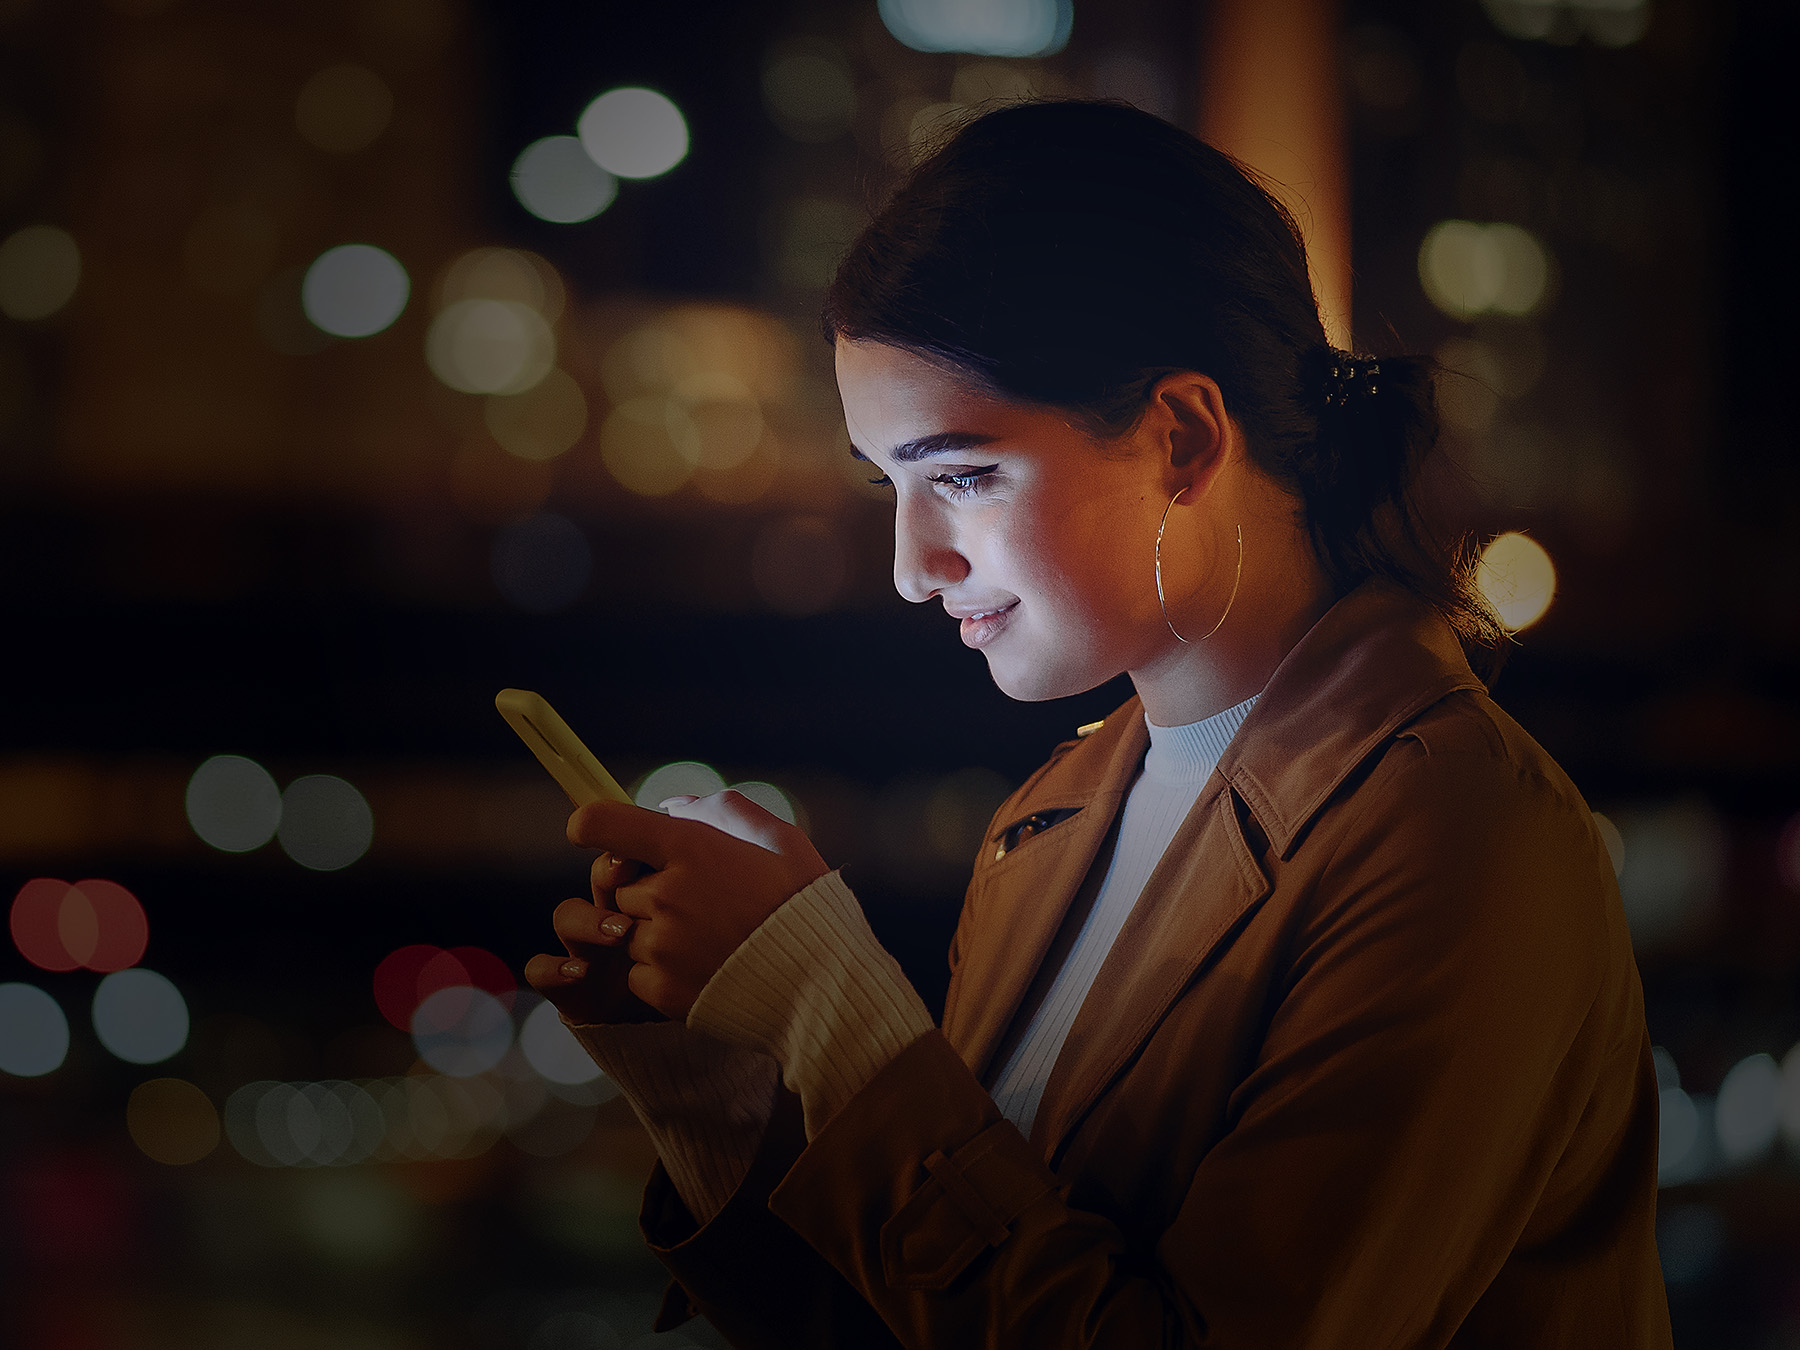 Woman engaged with her phone at night